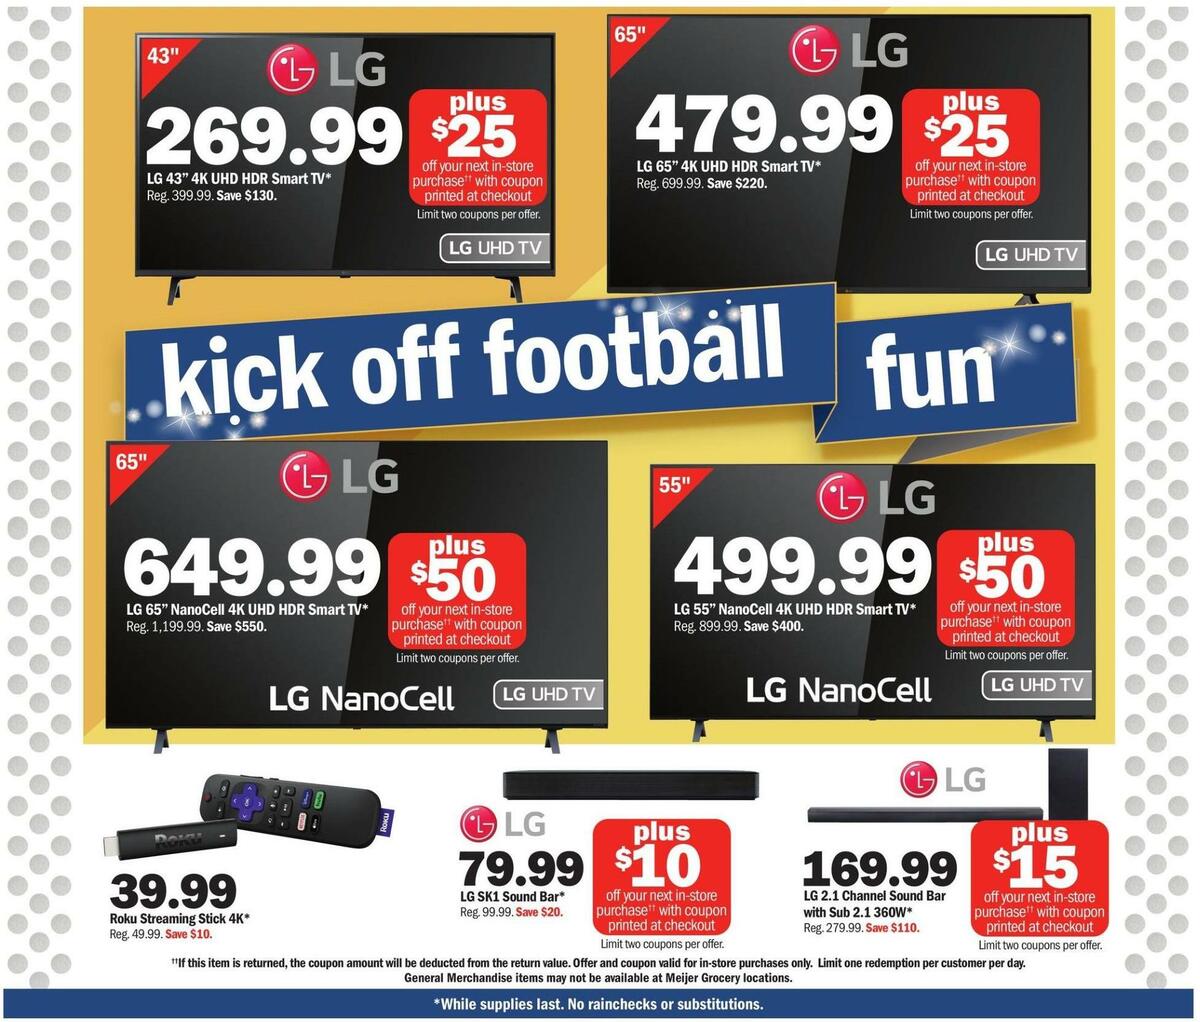 Meijer Superbowl Weekly Ad from February 5